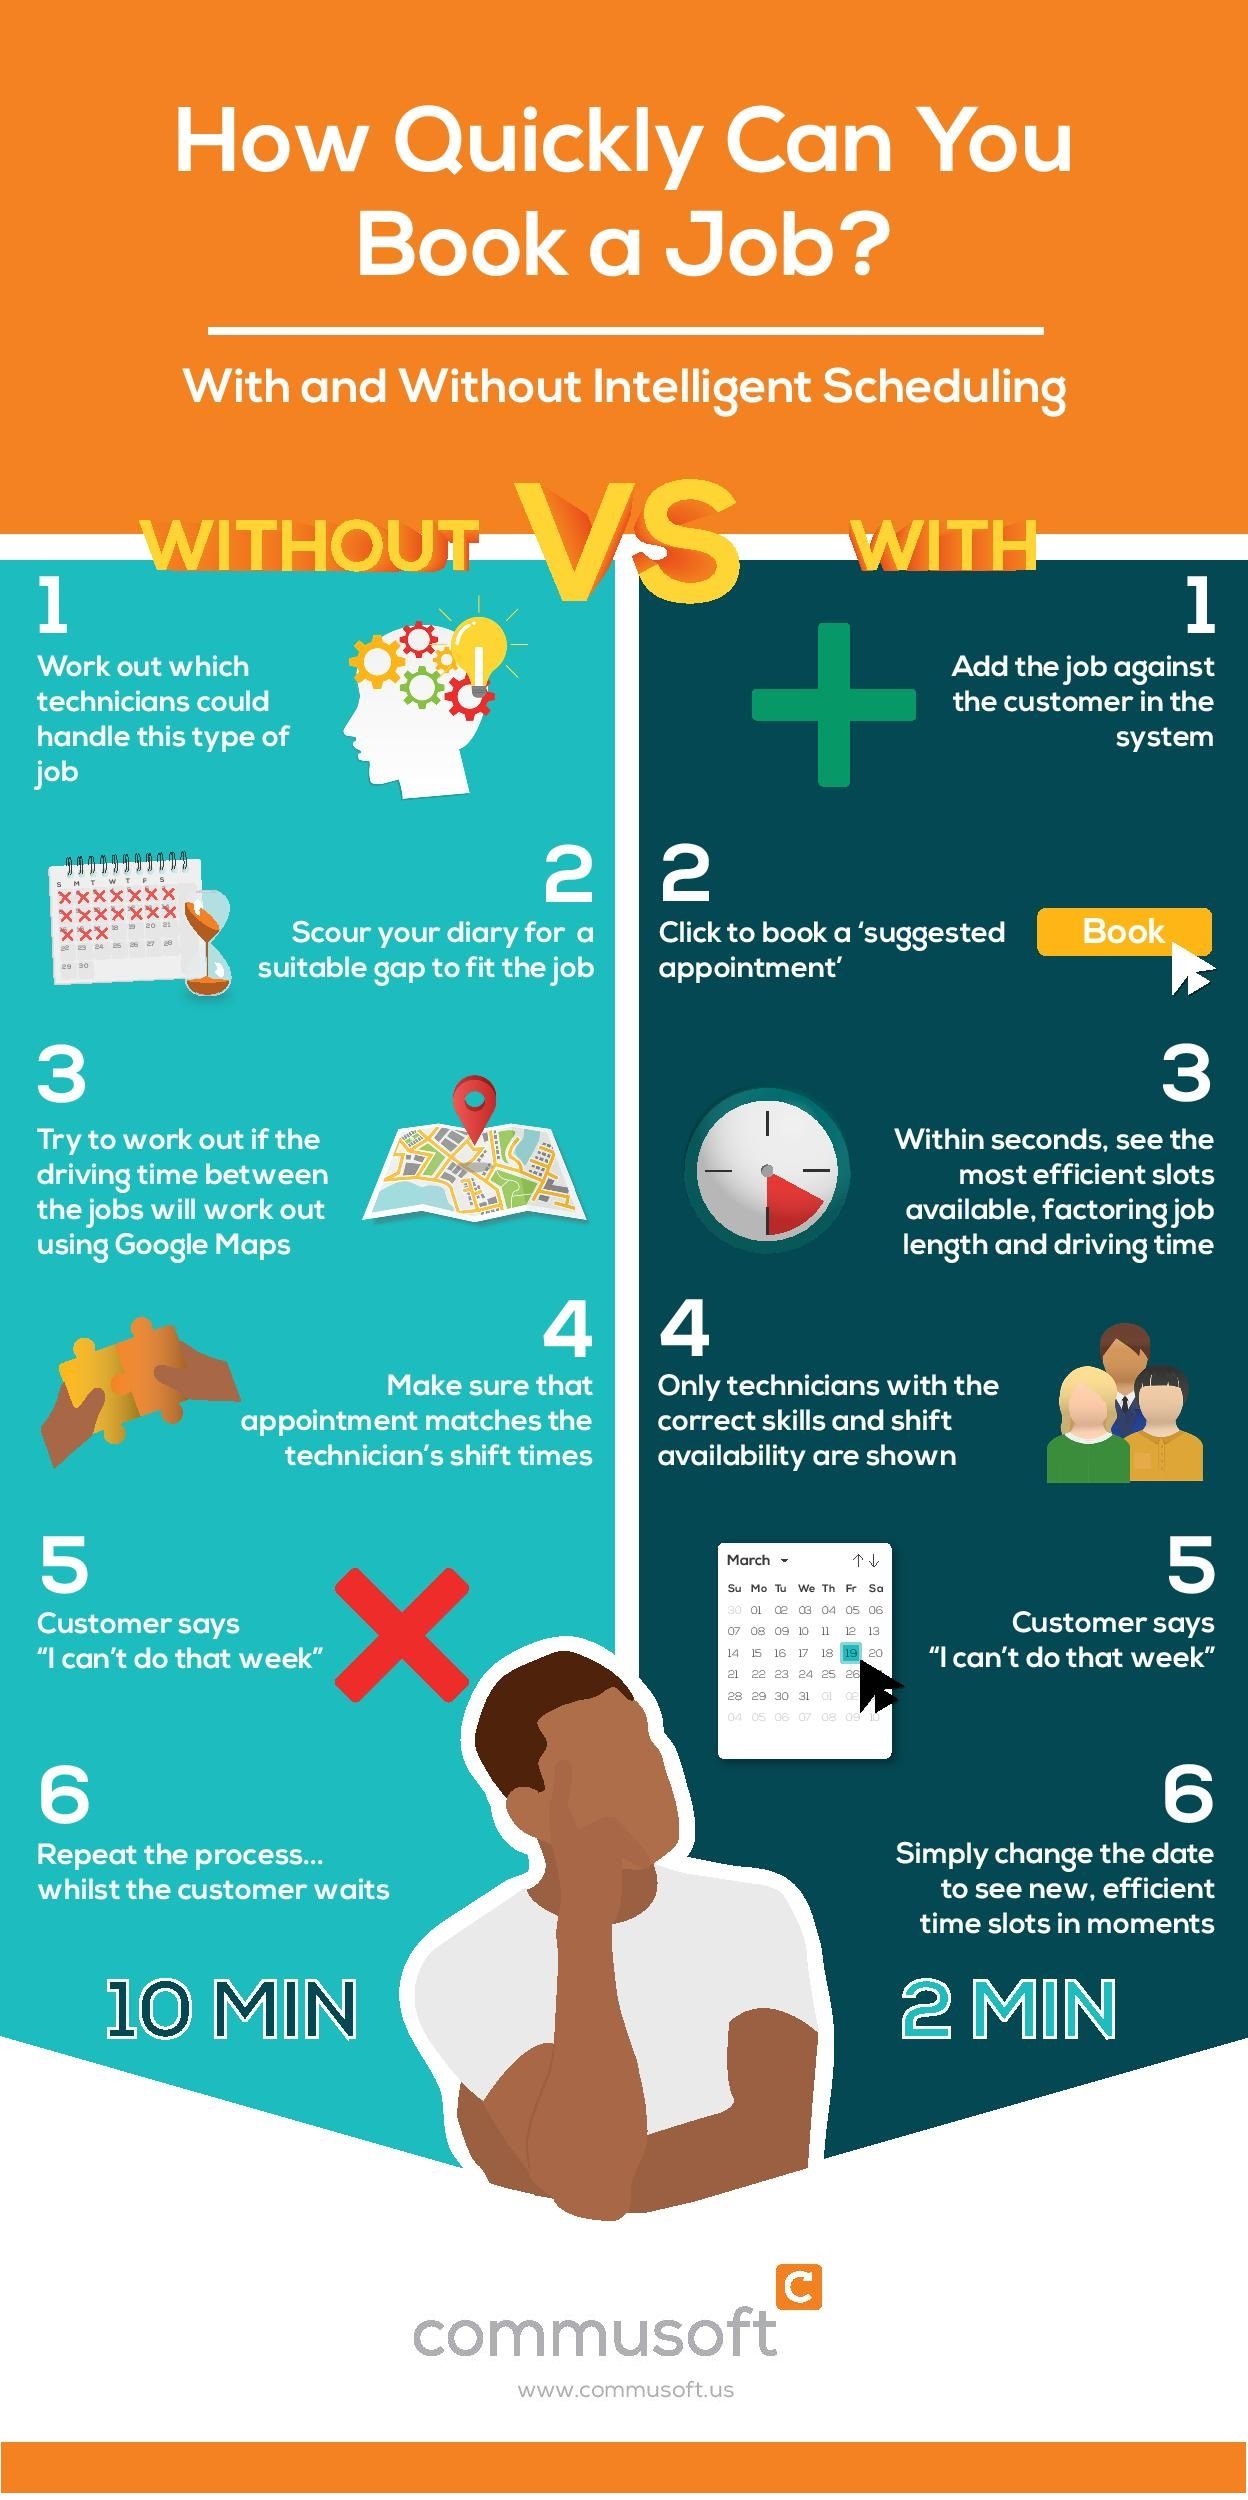 How quickly can I book a job infographic